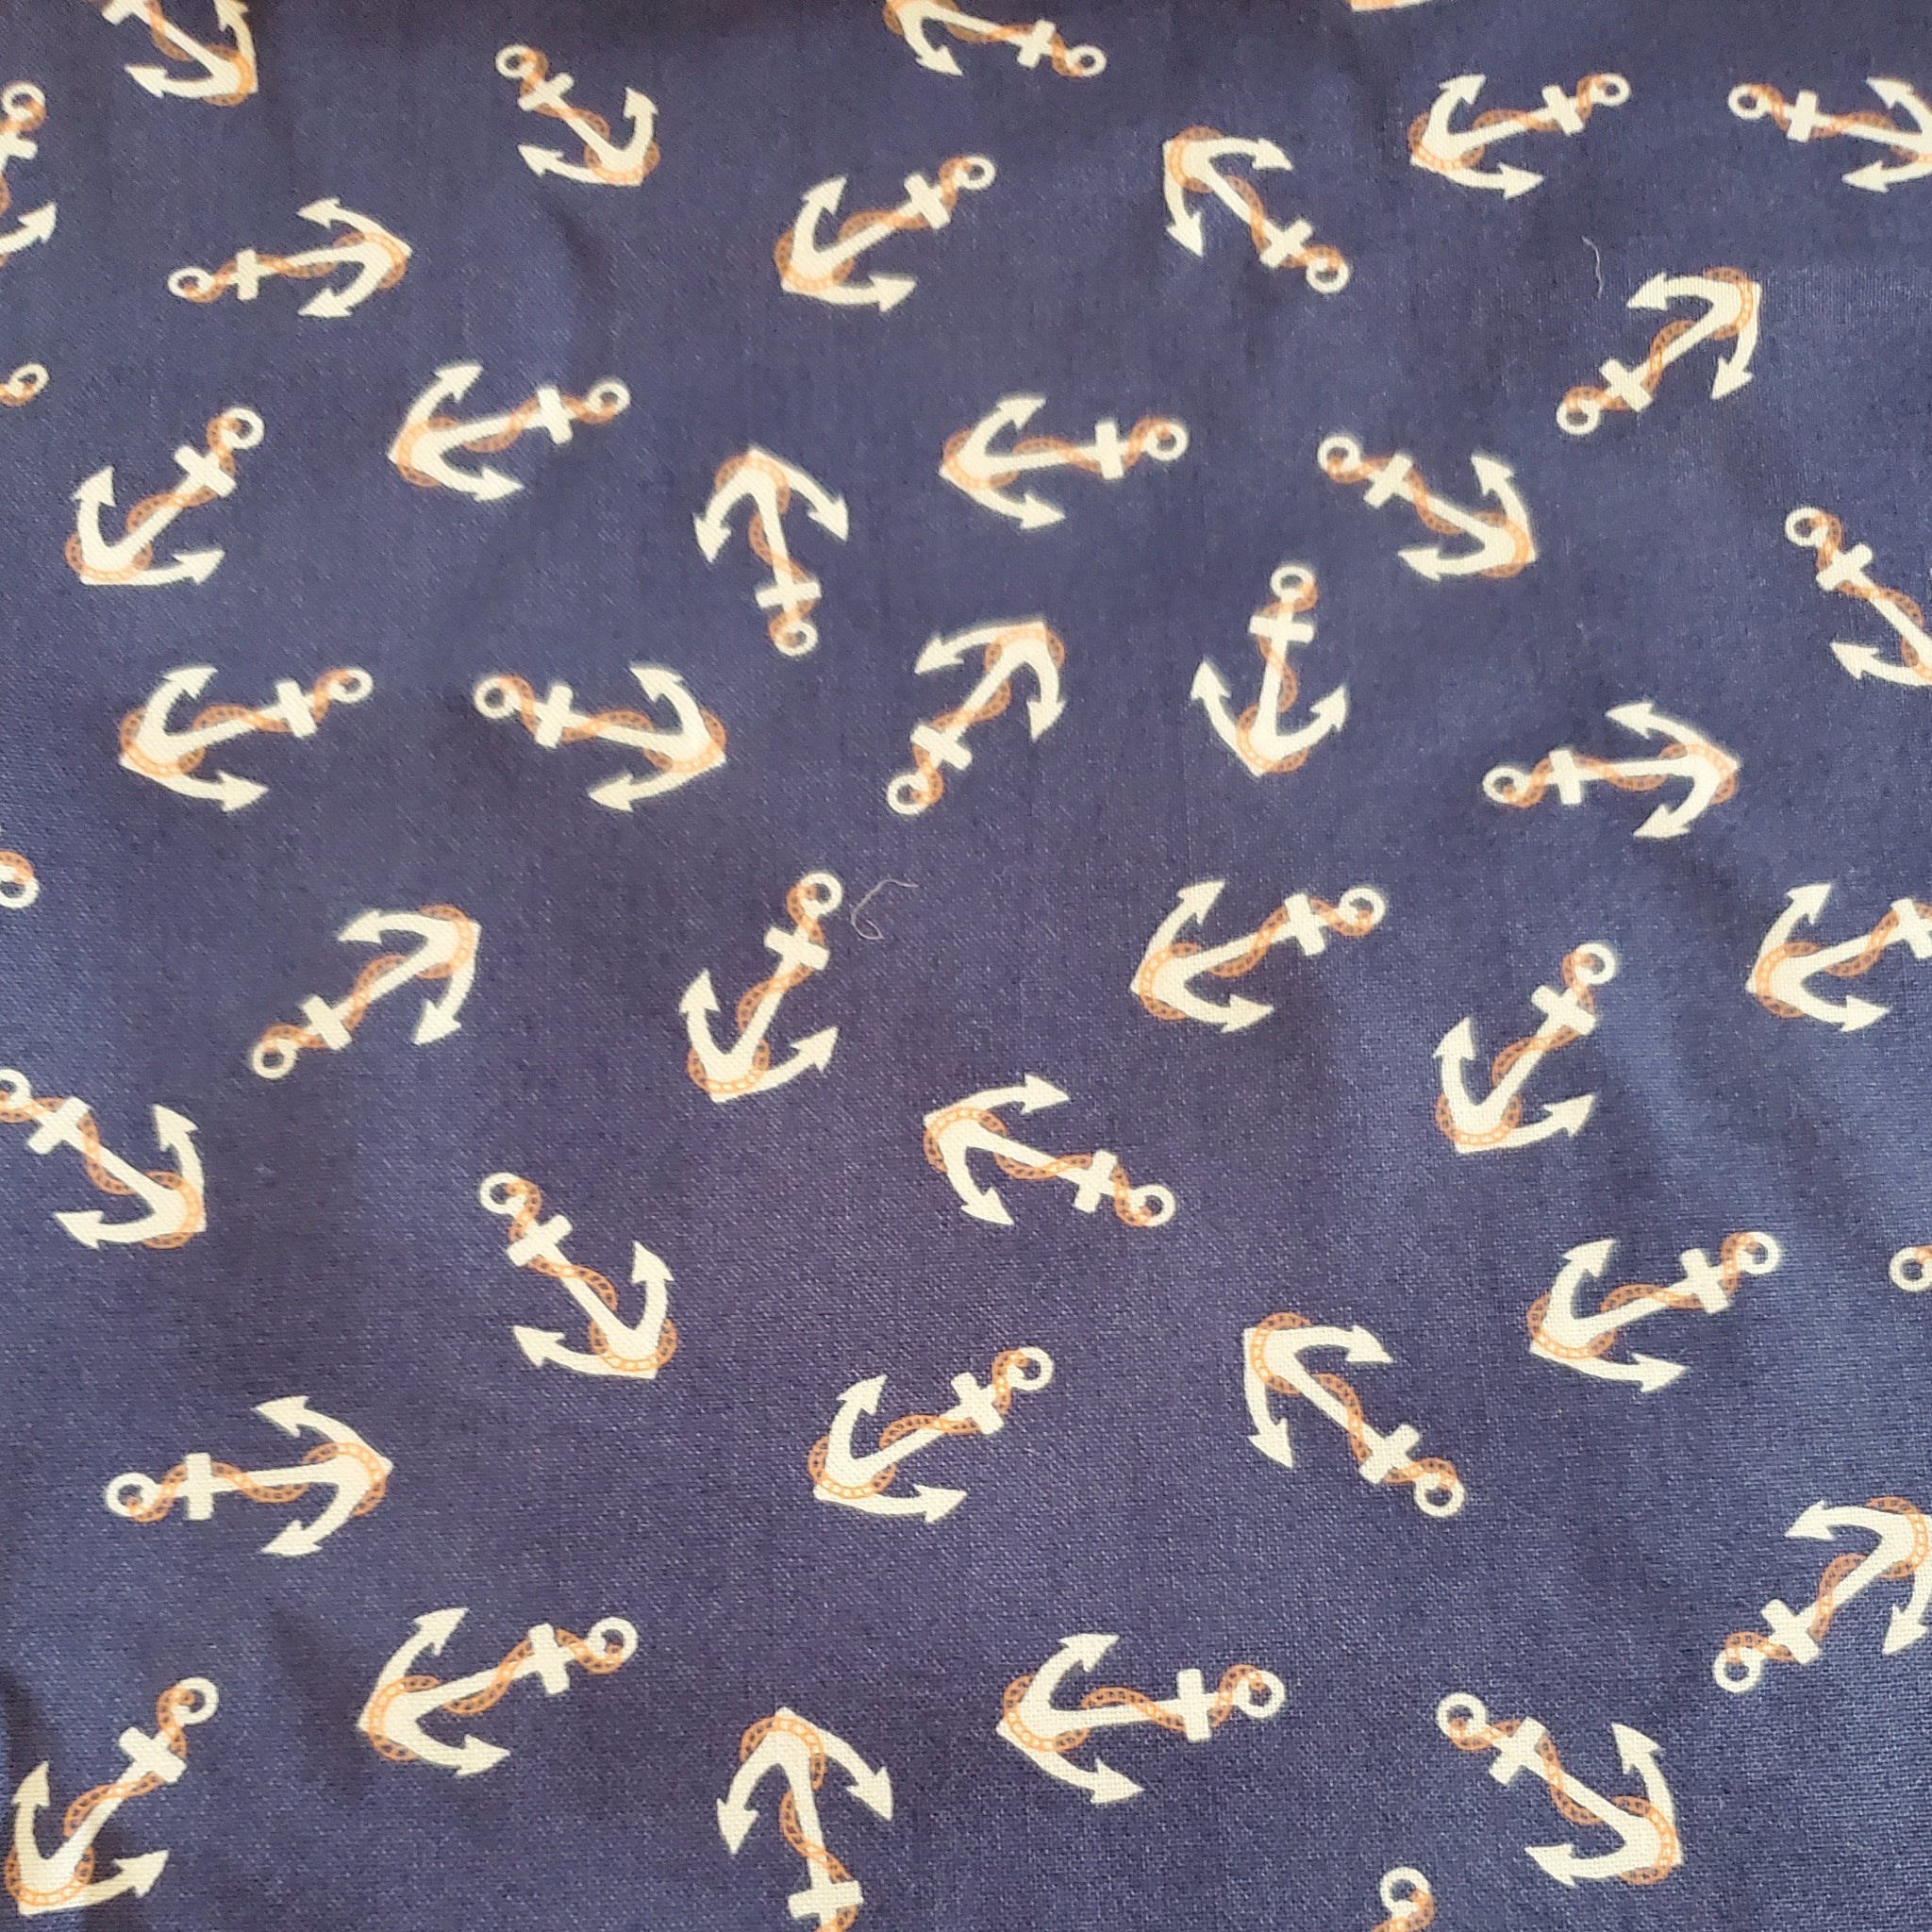 Anchors on blue background fabric swatch